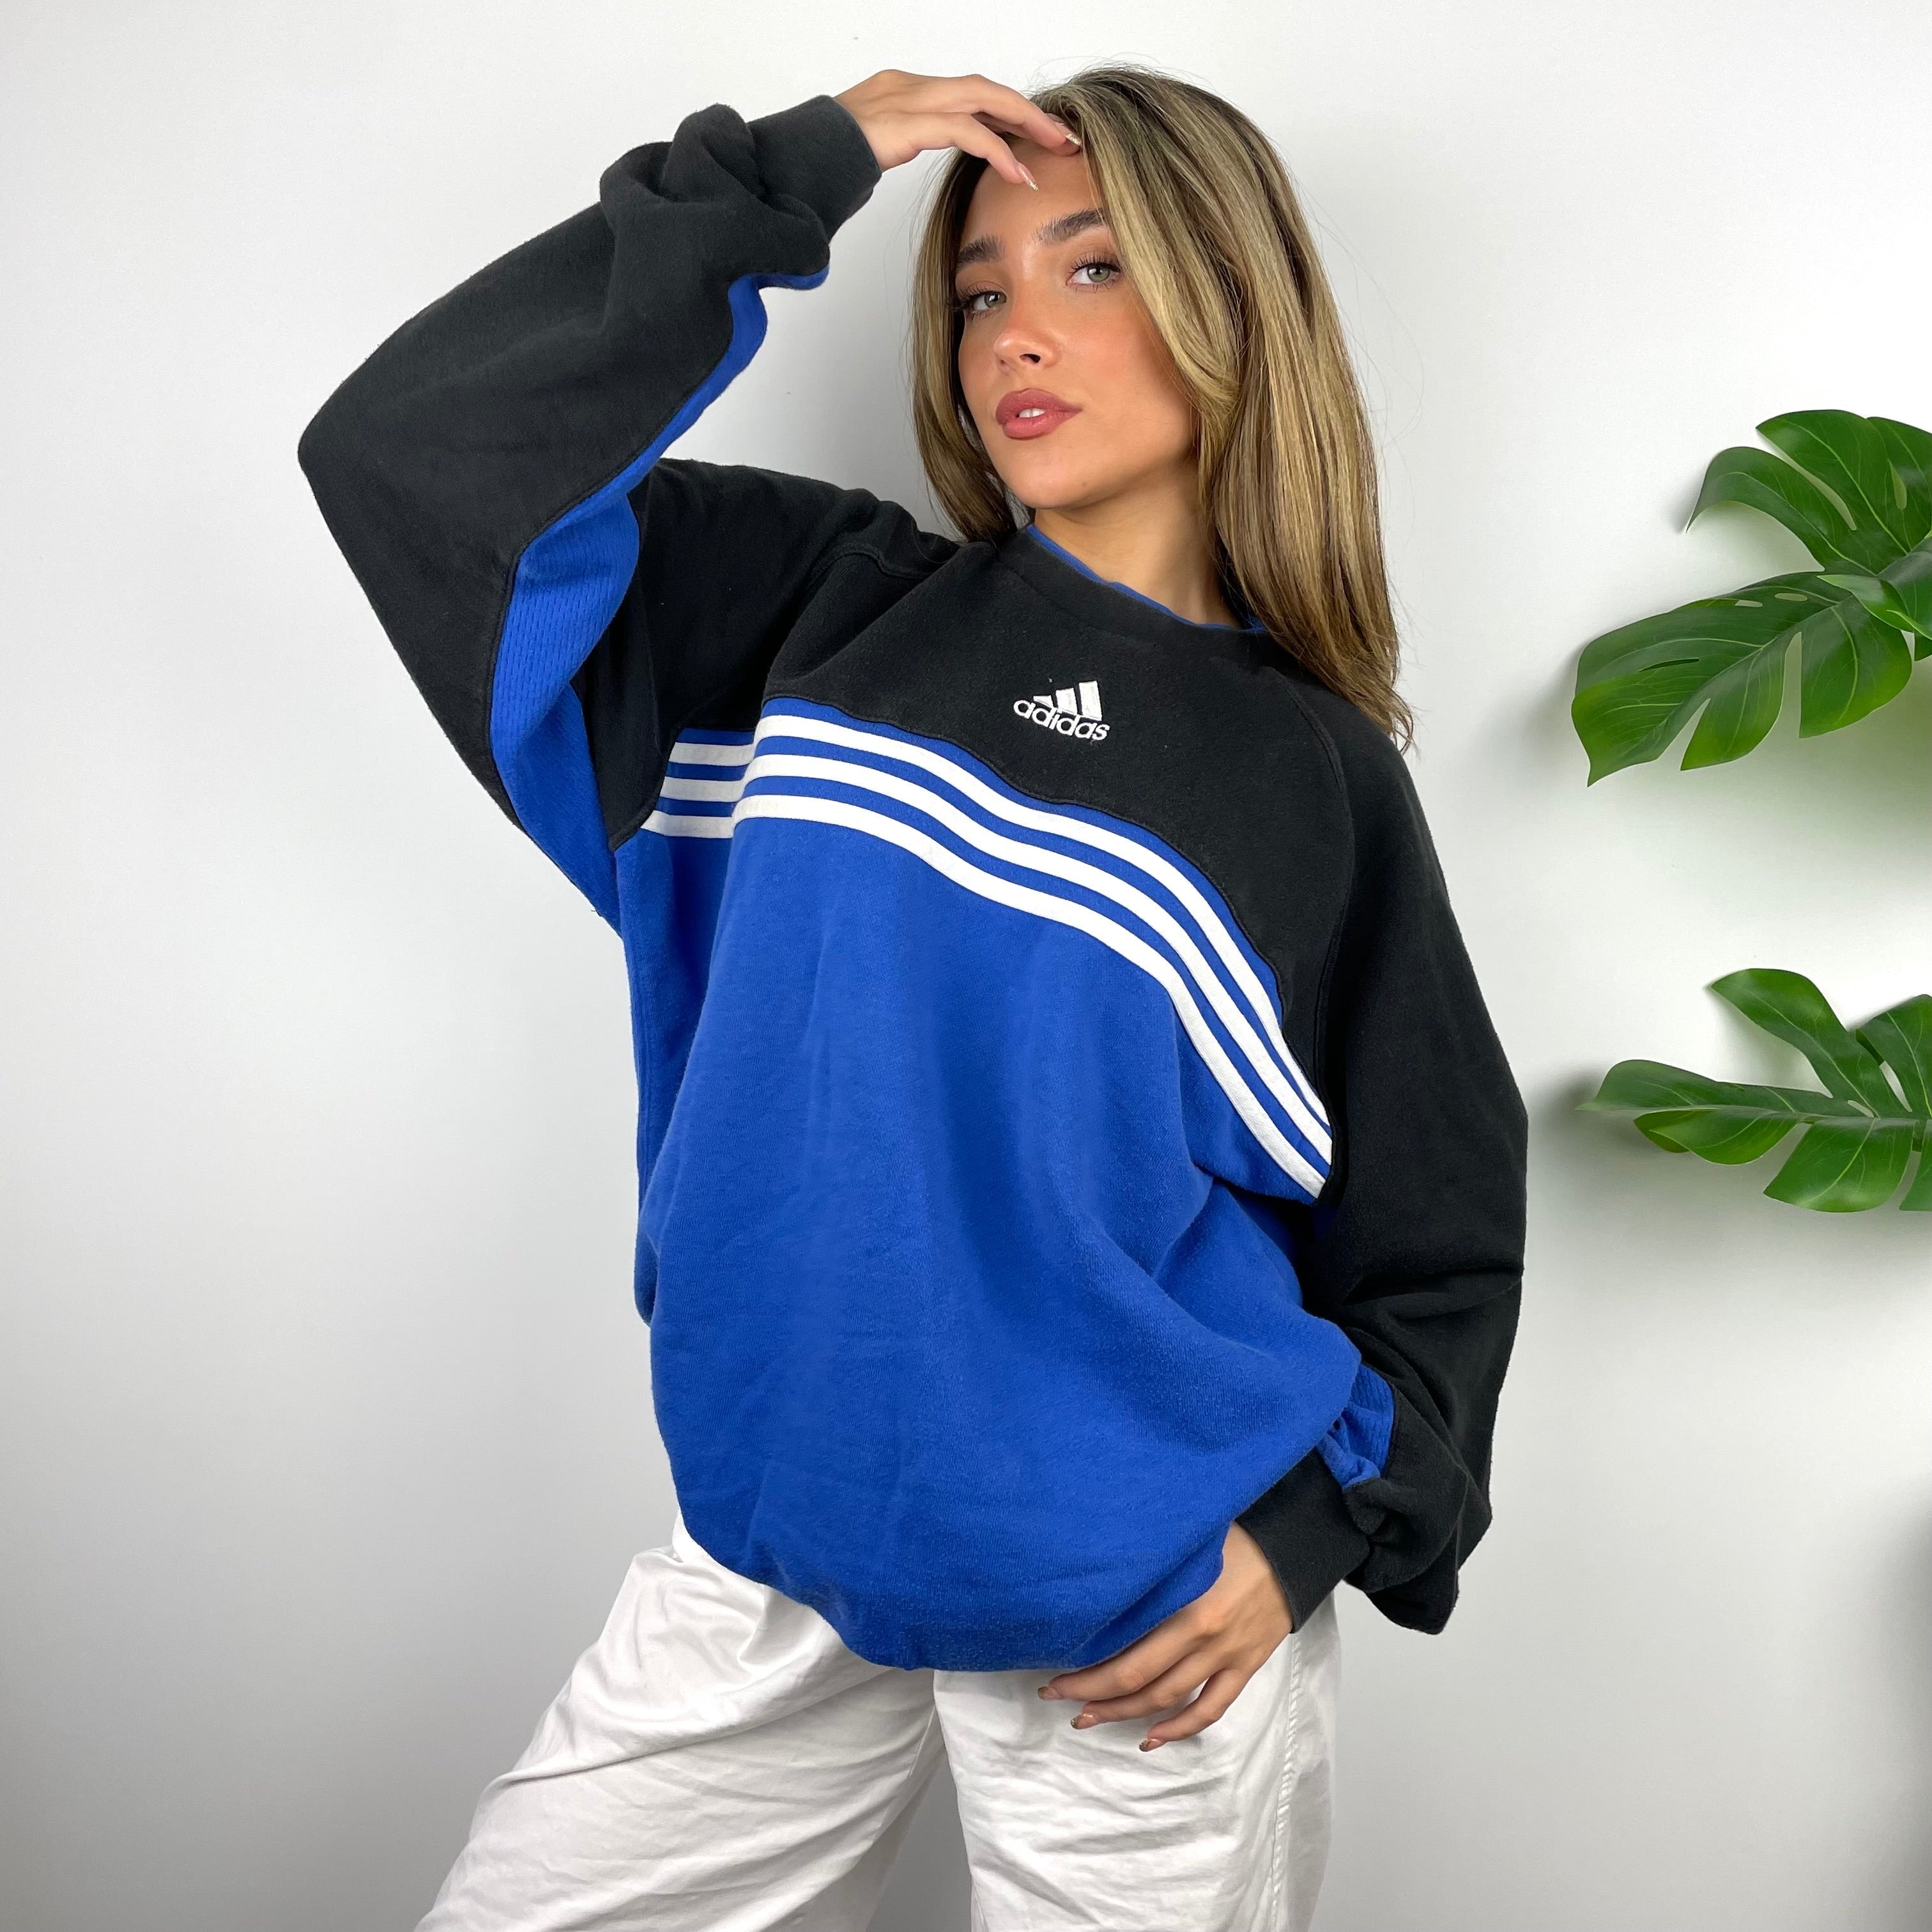 Adidas Black & Blue Embroidered Spell Out Sweatshirt (L)